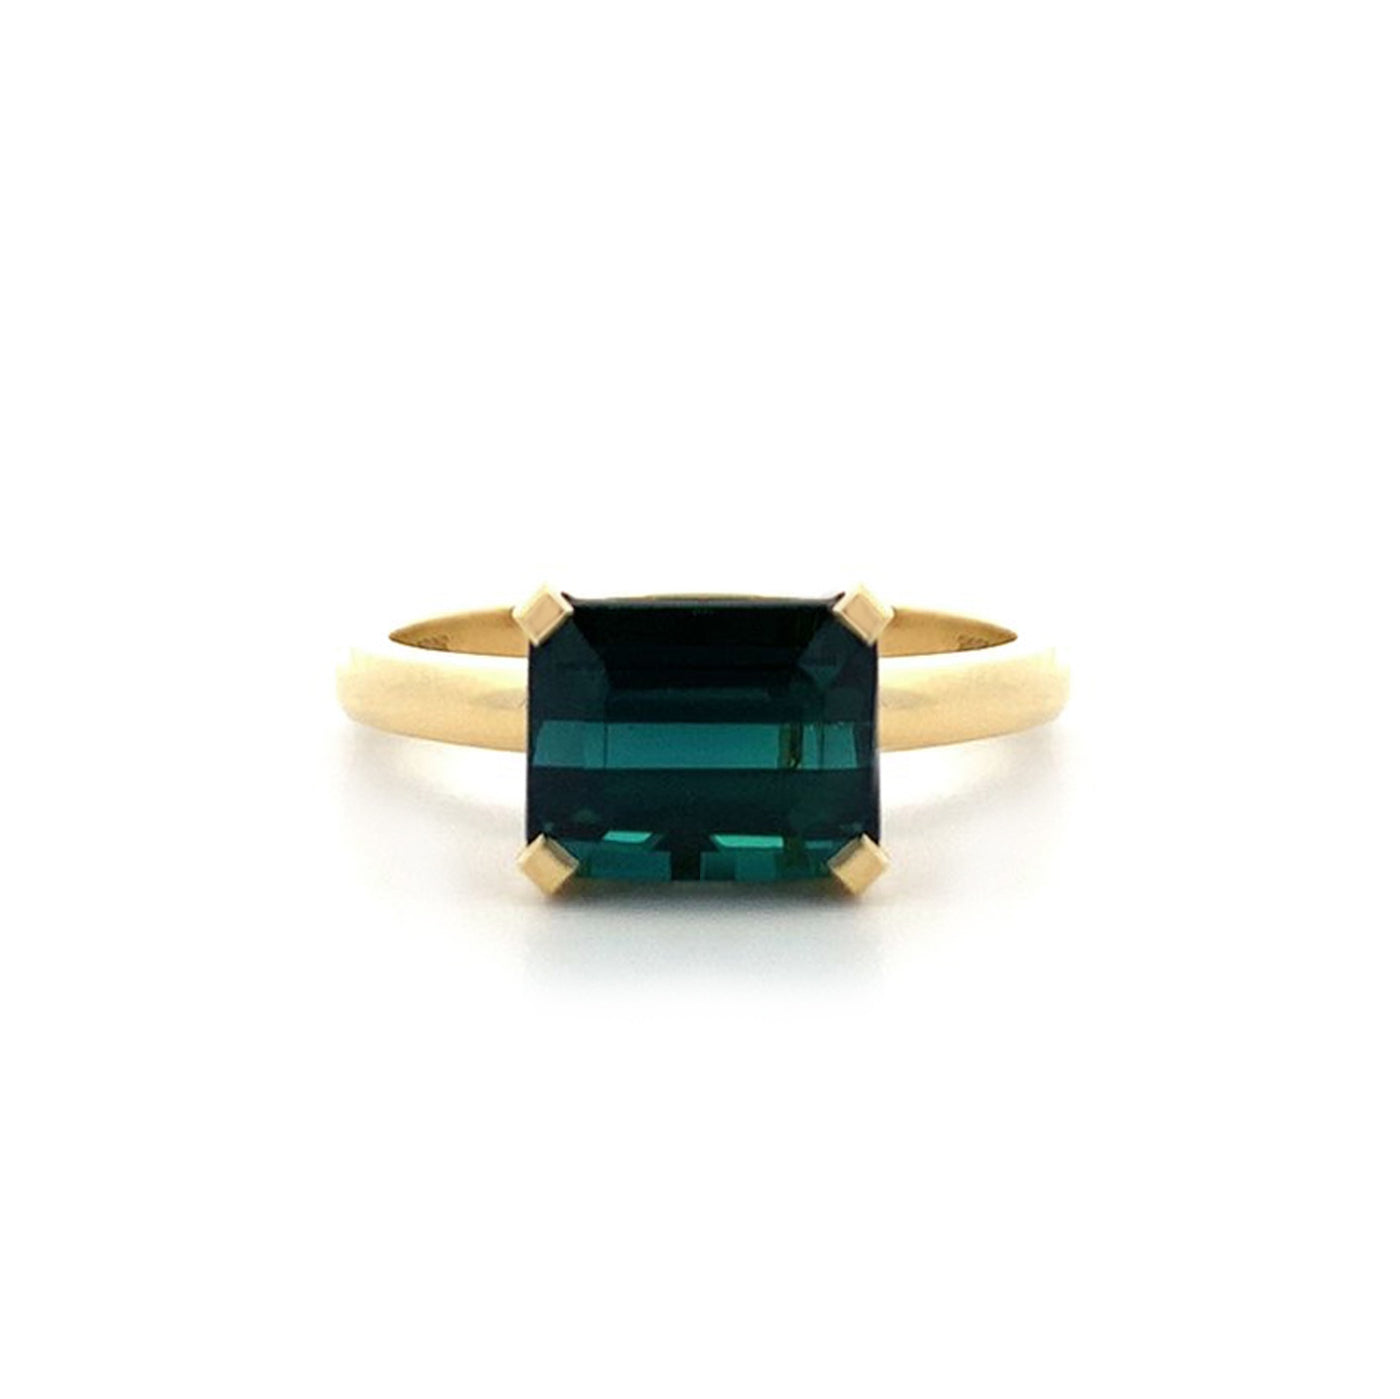 Octagonal Cut Green Tourmaline Solitaire Ring in Yellow Gold | 3.52ct